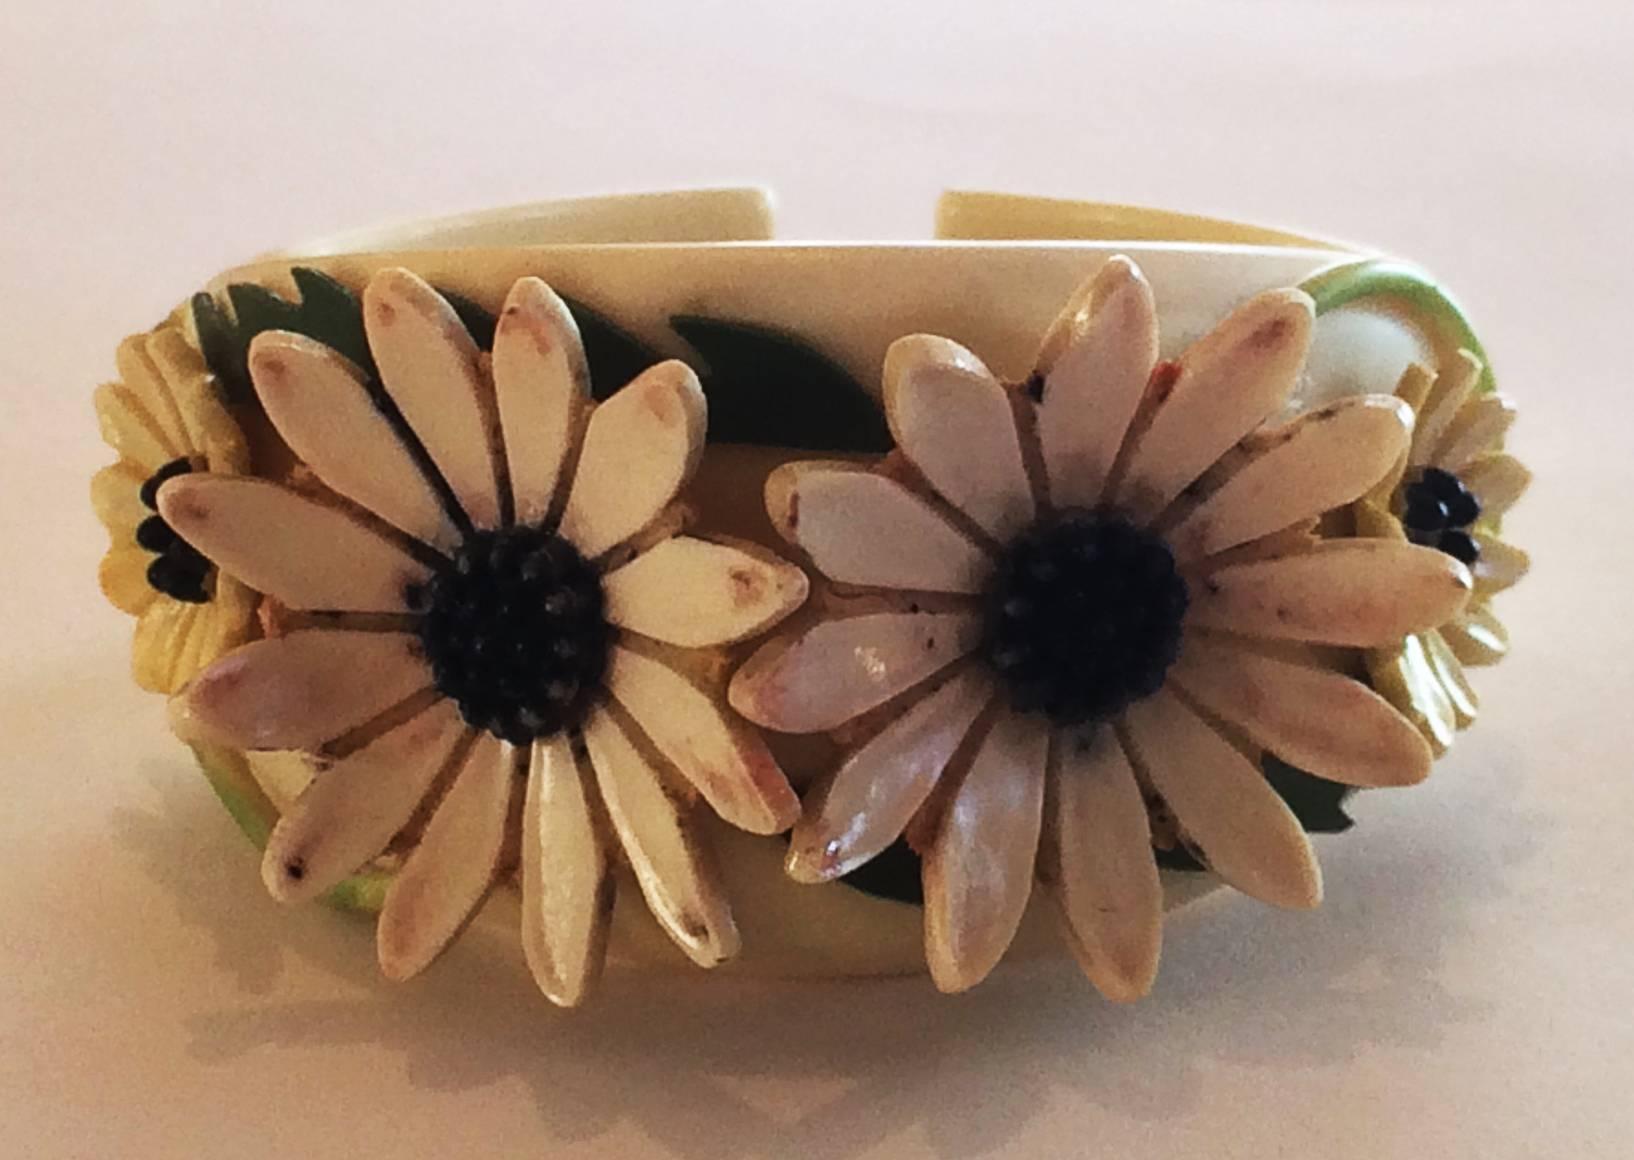 Art Deco Bracelet Rare Double Hinge Clamper, in white, with White Daisies, black/blue centres, and with green leaves and stems.  A rare and intricate carved design, all in excellent condition, including the double hinge arrangement, which is very